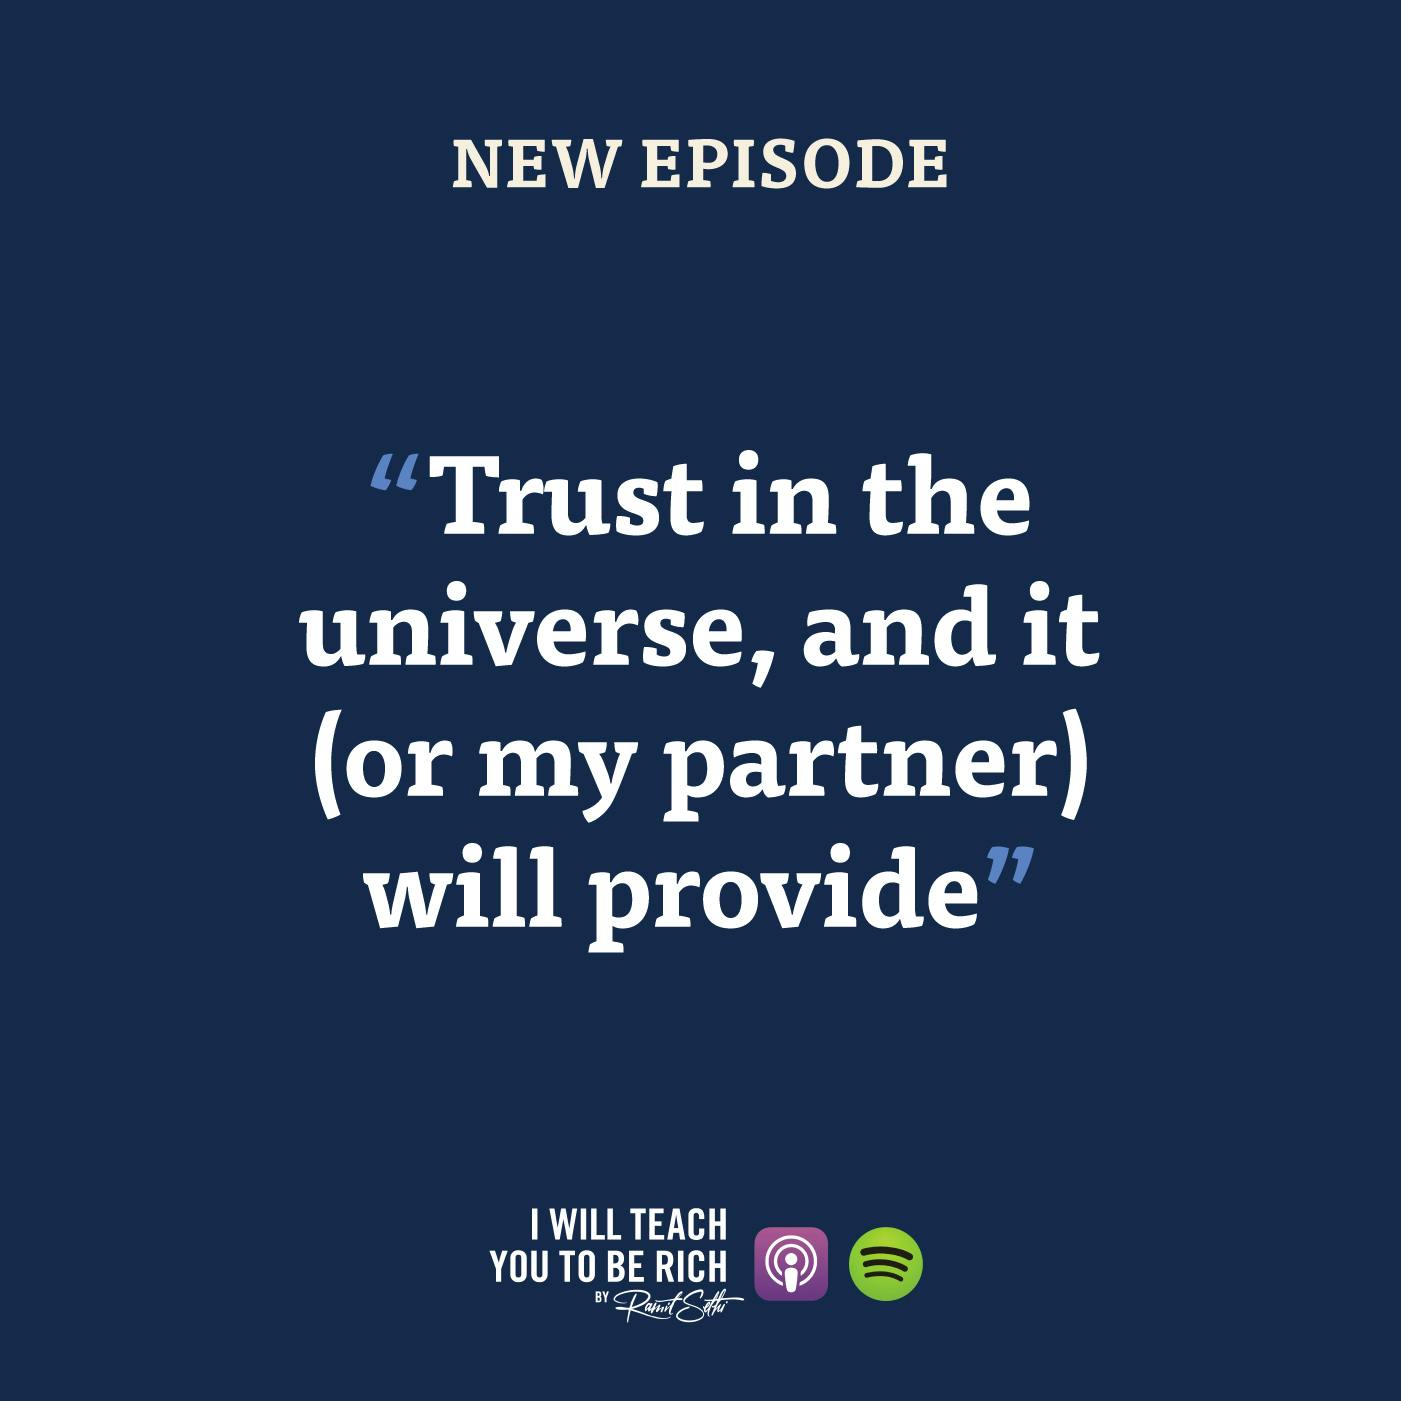 44. “Trust in the universe and it (or my partner) will provide”